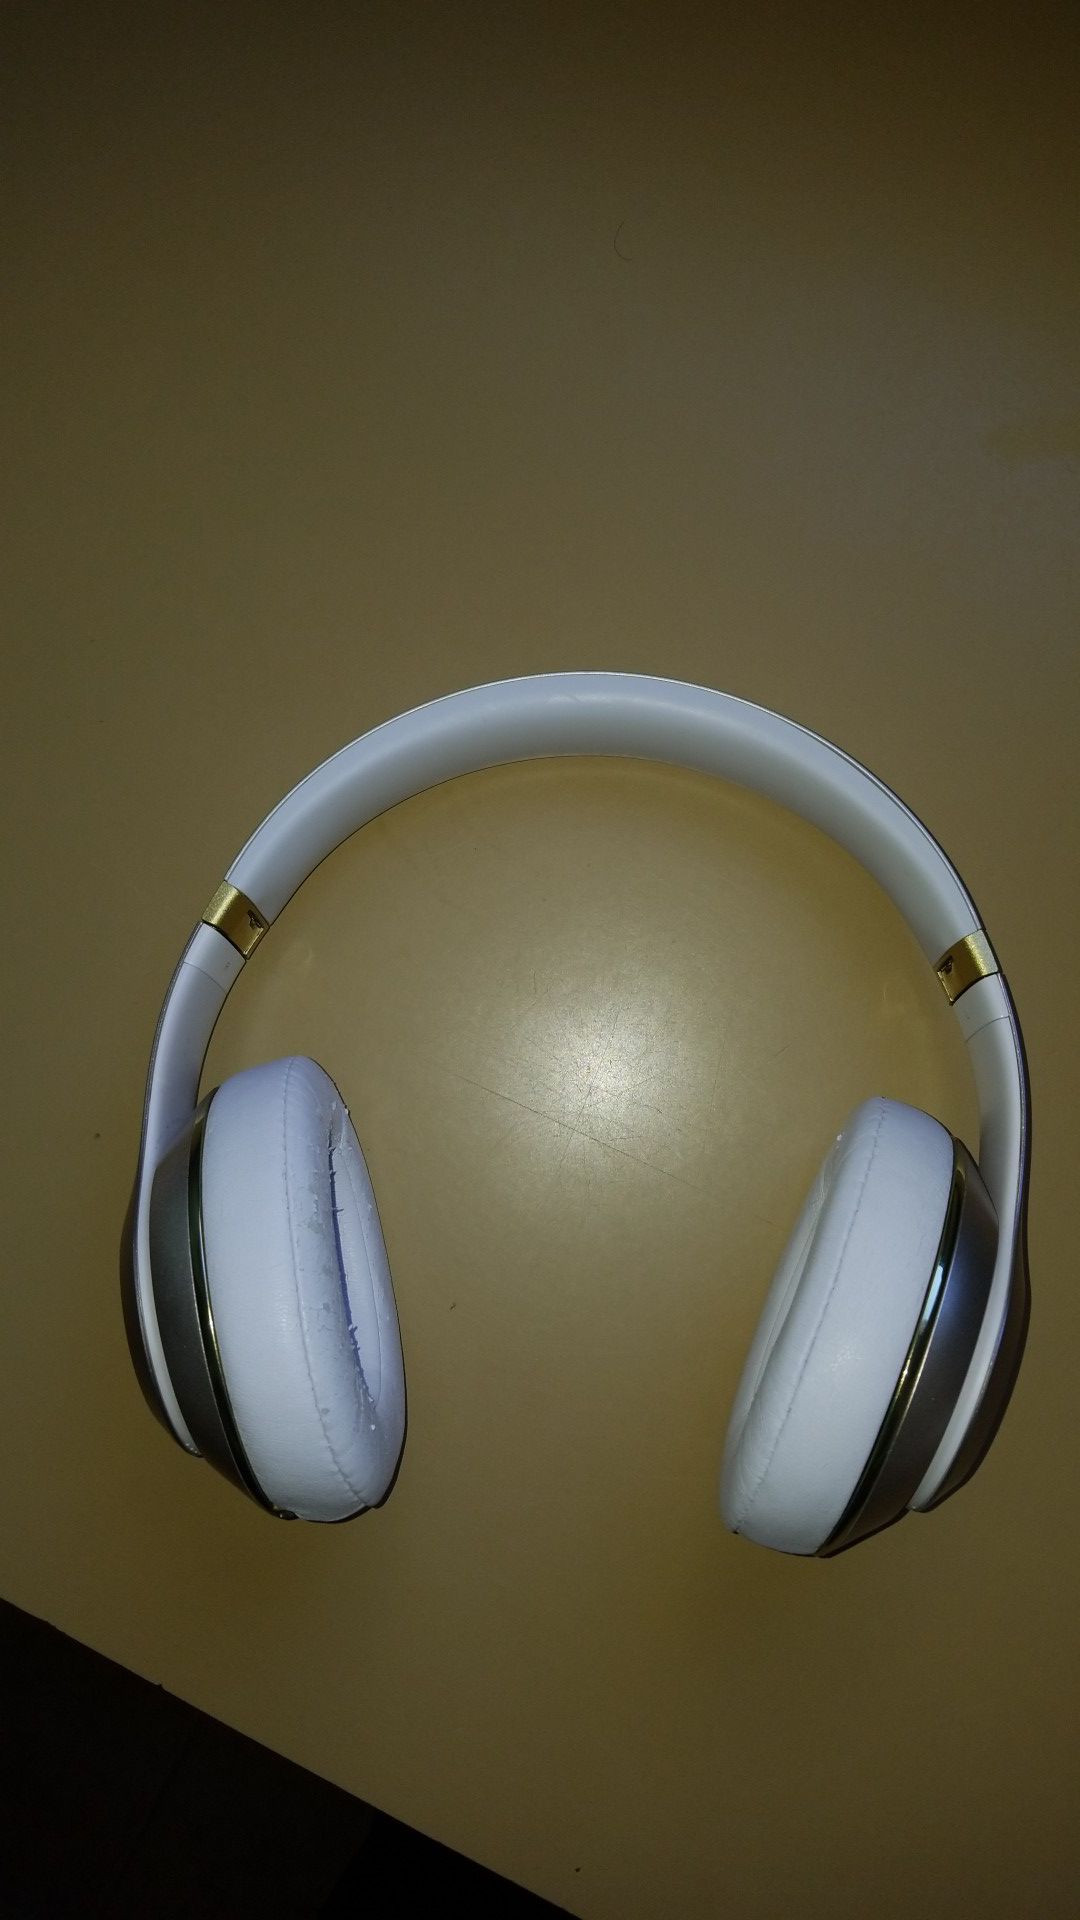 Excellent Beats by Dre Studio 2 Wireless (Gold /White)